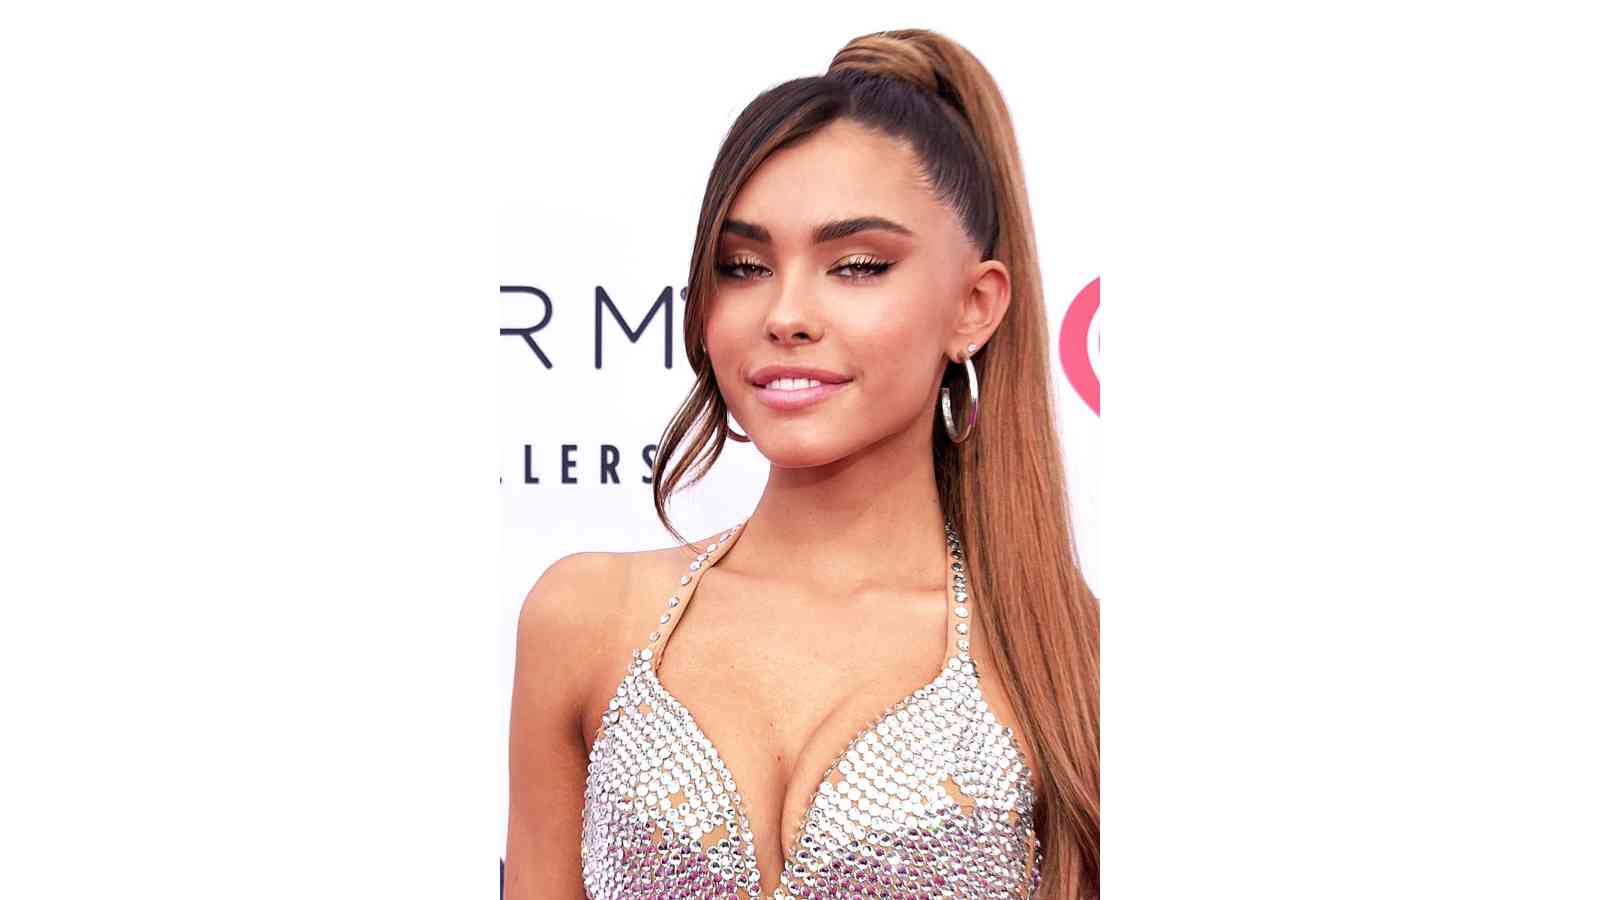 Madison Beer Biography: Age, Height, Birthday, Family, Net Worth